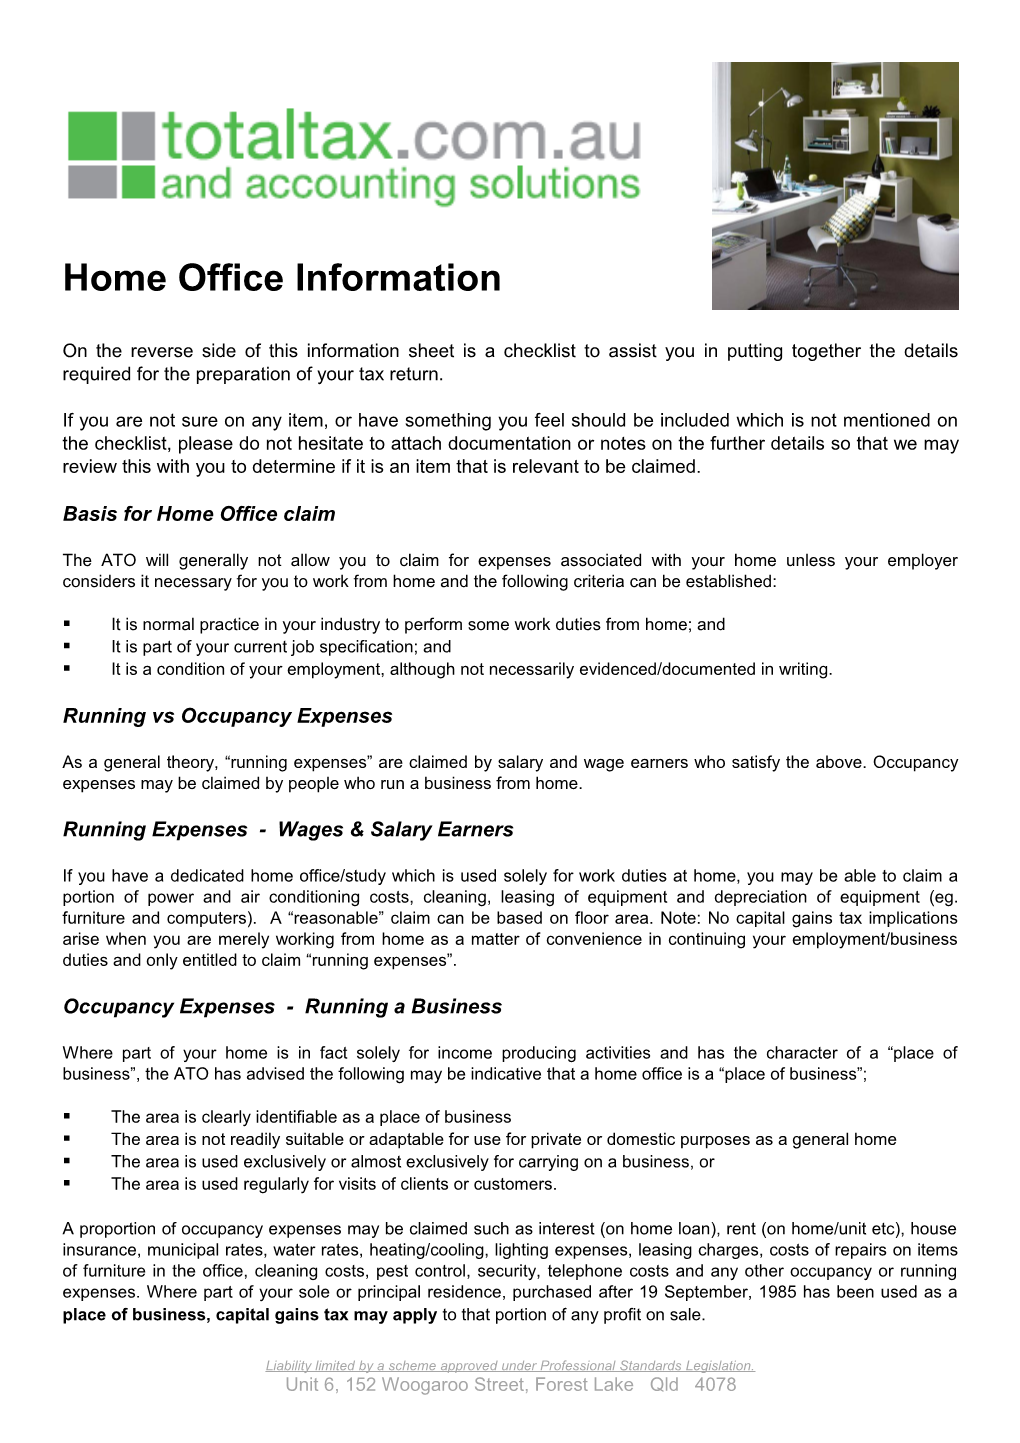 Home Office Information